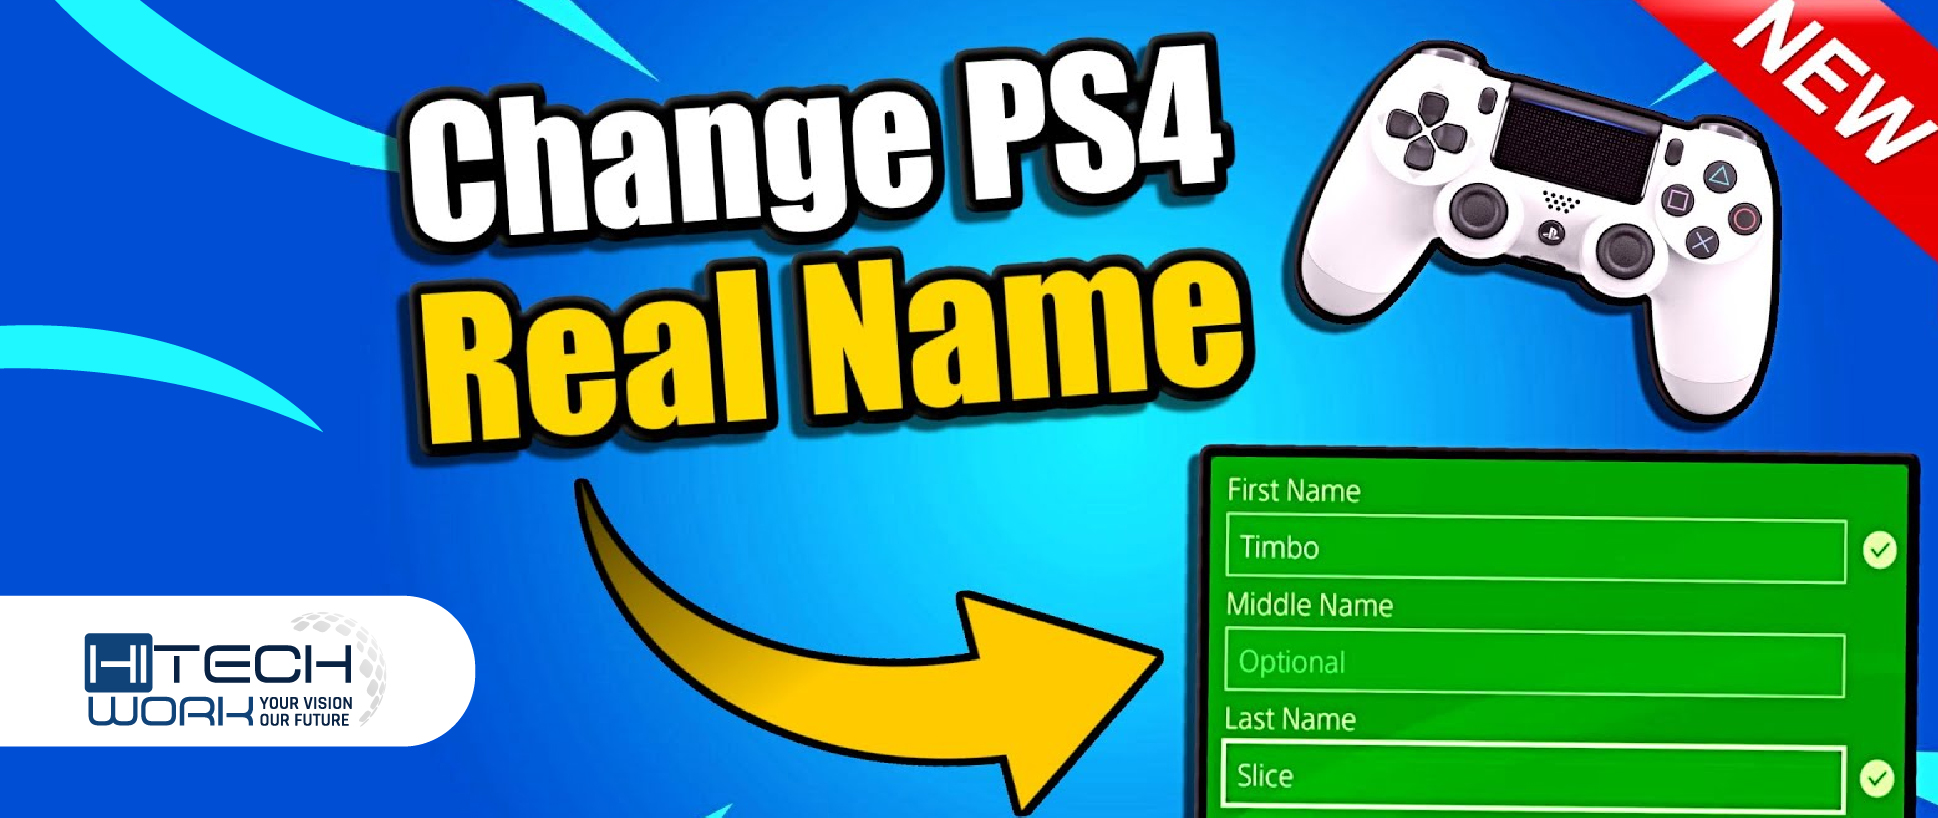 How to Change PSN Name on PS4